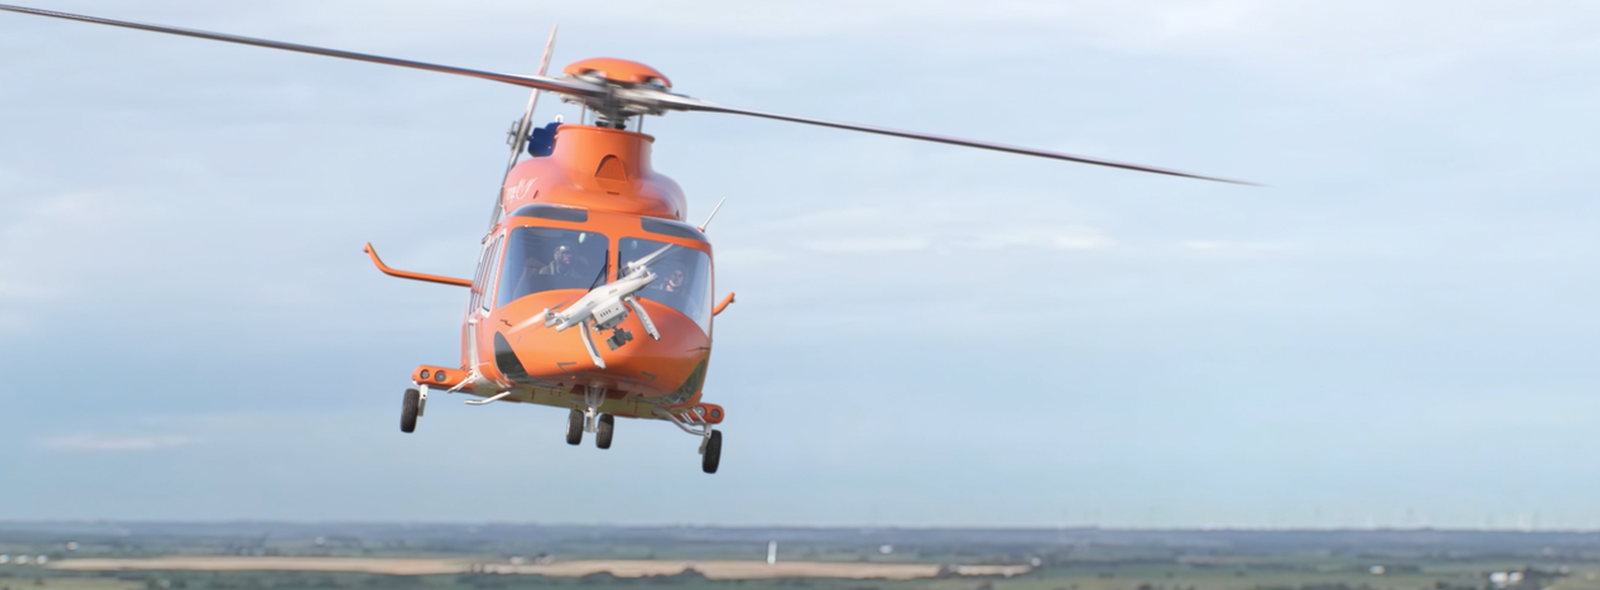 Drone flying in close proximity to an Ornge helicopter